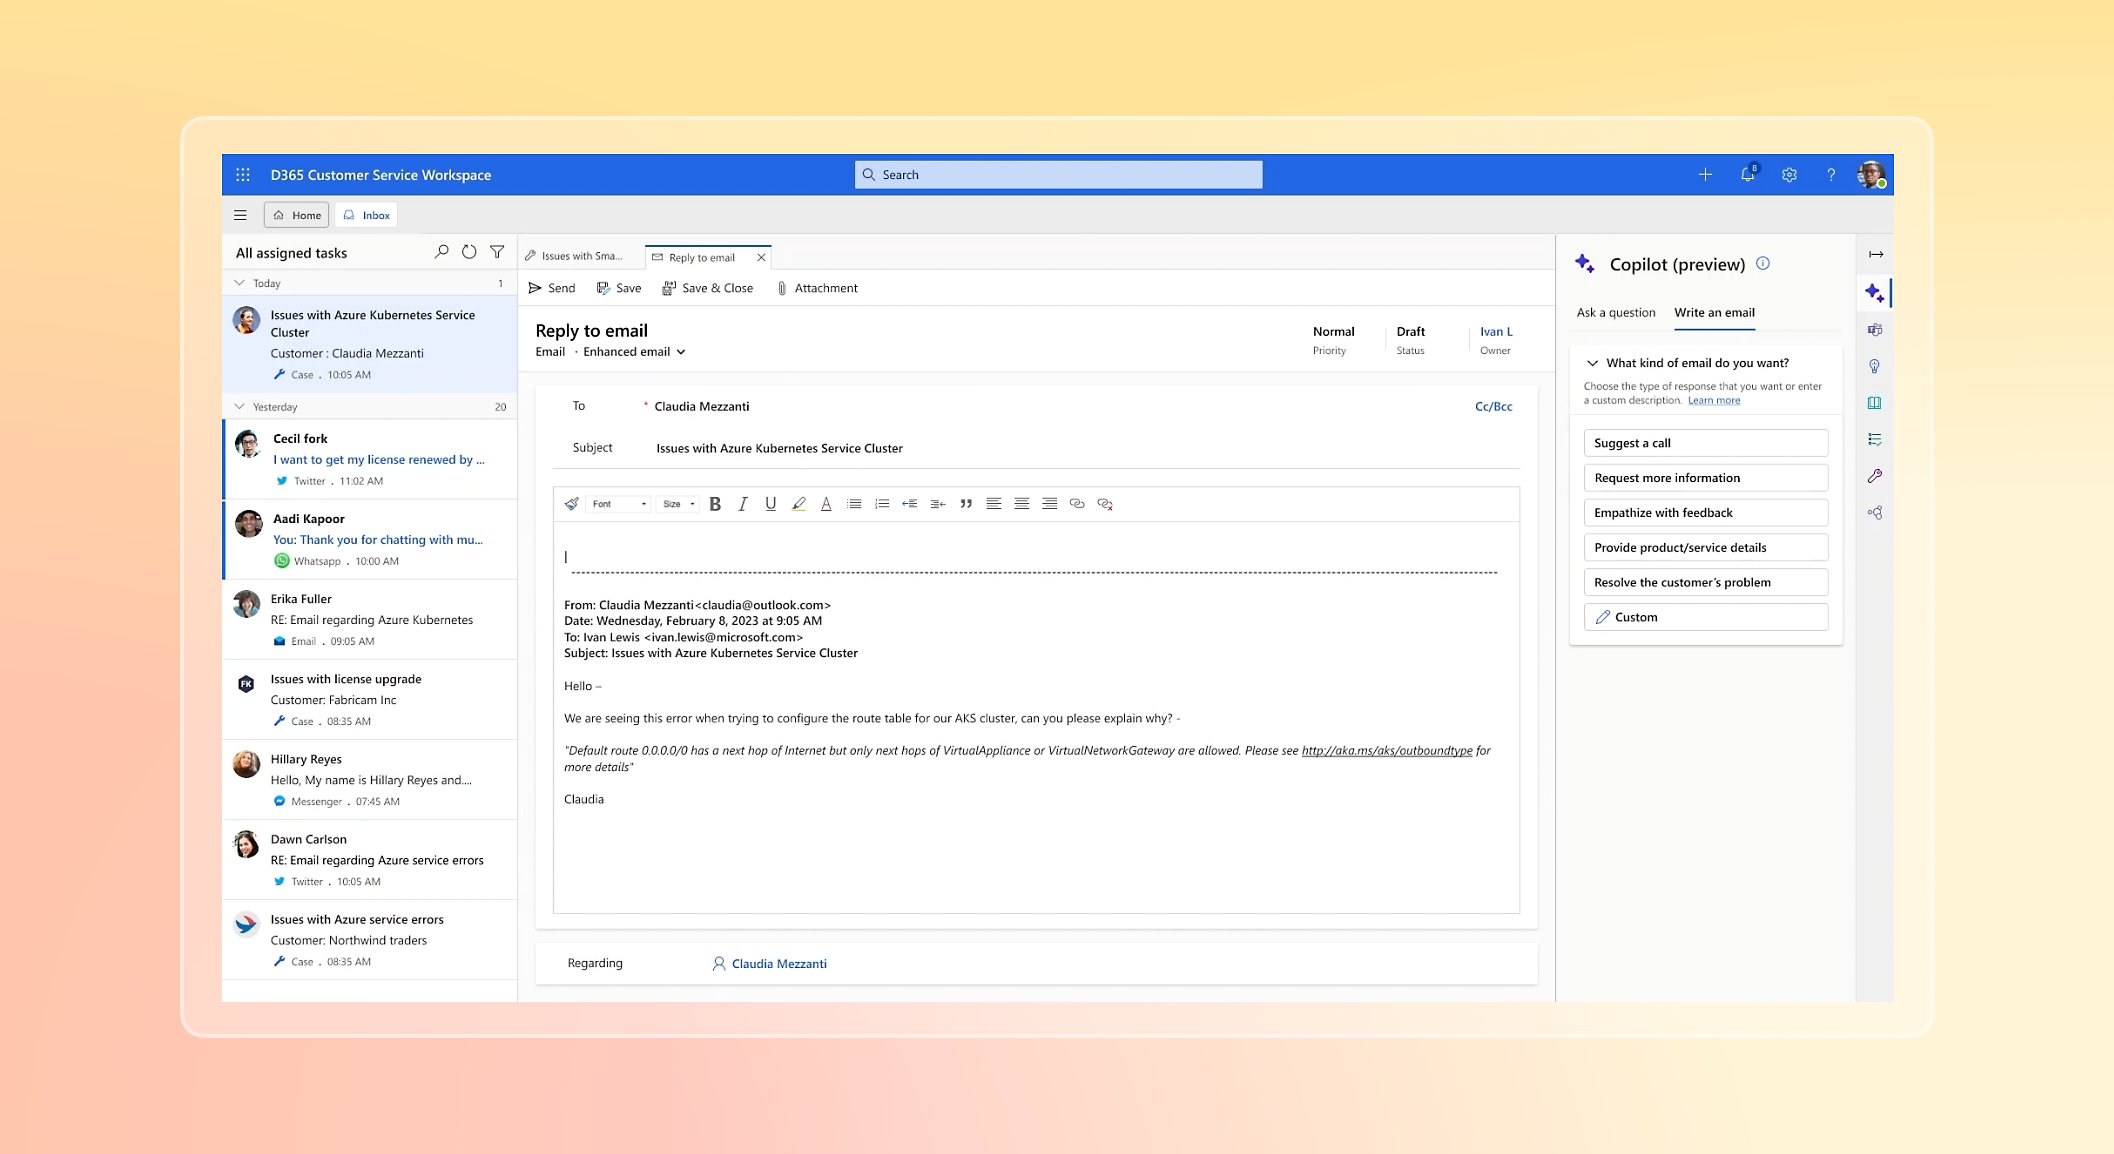 Window for dynamics 365 showing an email with copilot preview to the right side